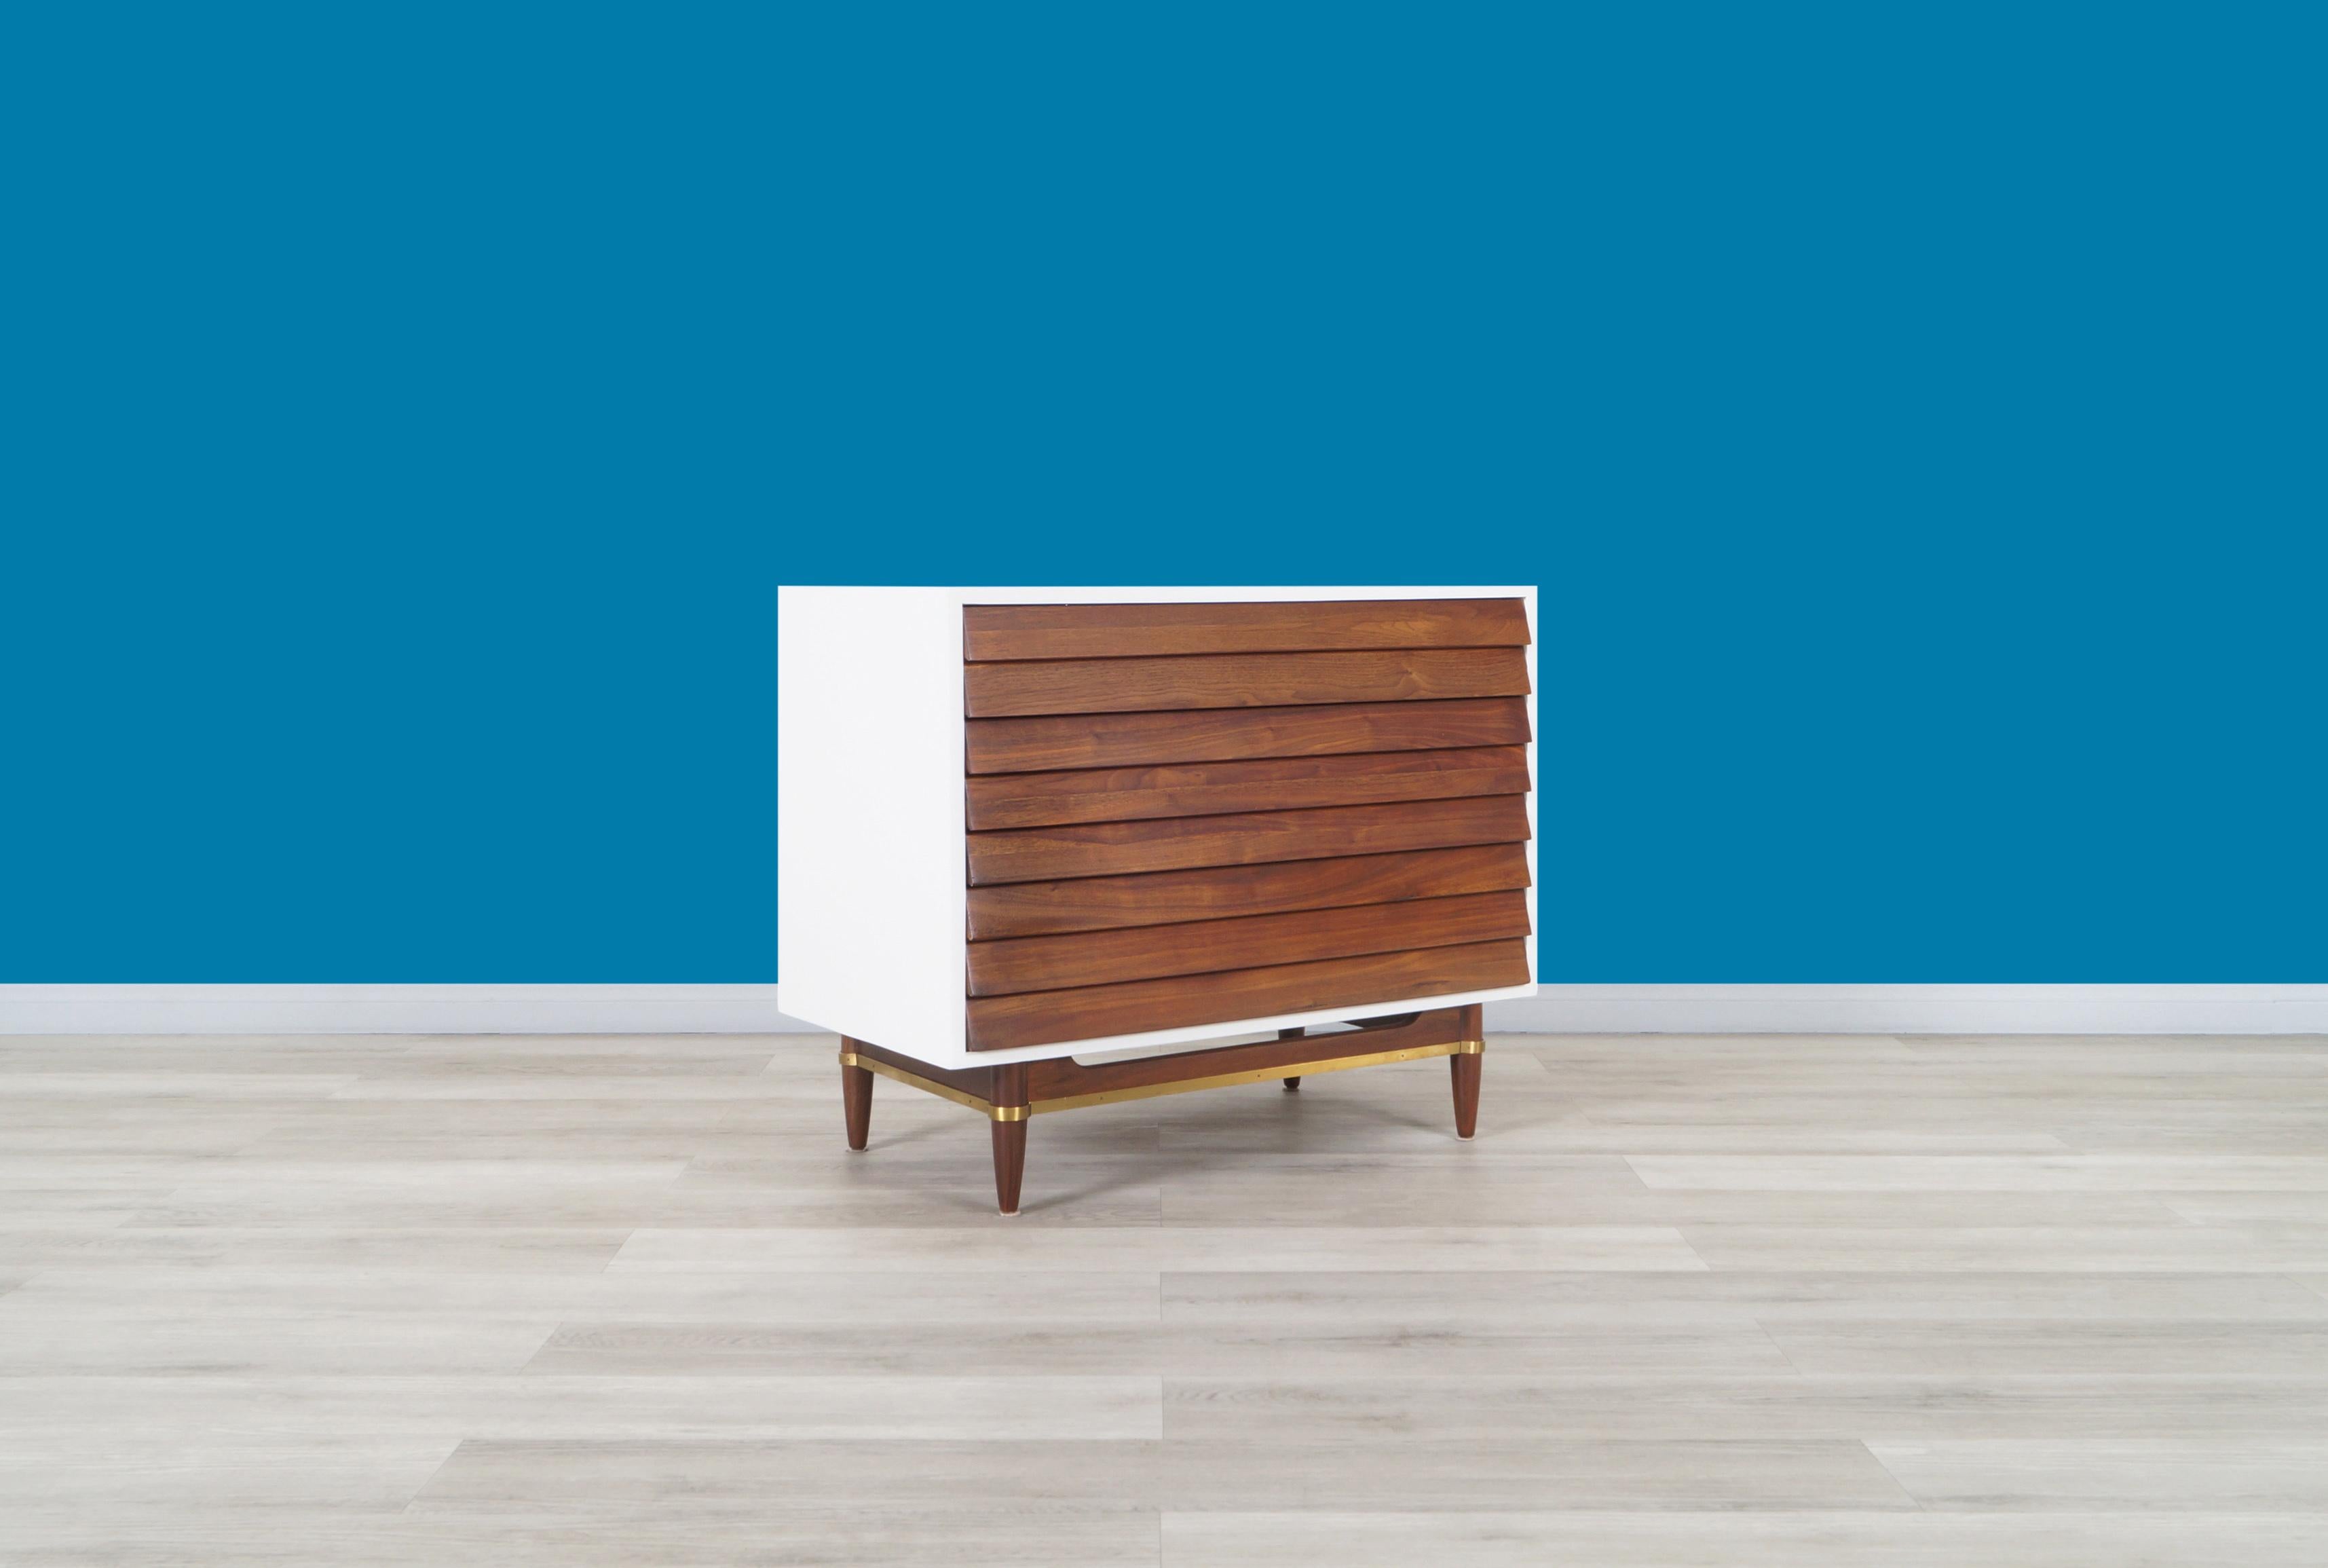 Wonderful vintage walnut and lacquered chest of drawers designed by Merton L. Gershun for American of Martinsville in United States, circa 1960s. This dresser has an elegant white lacquered case that combines perfectly with the walnut wood that